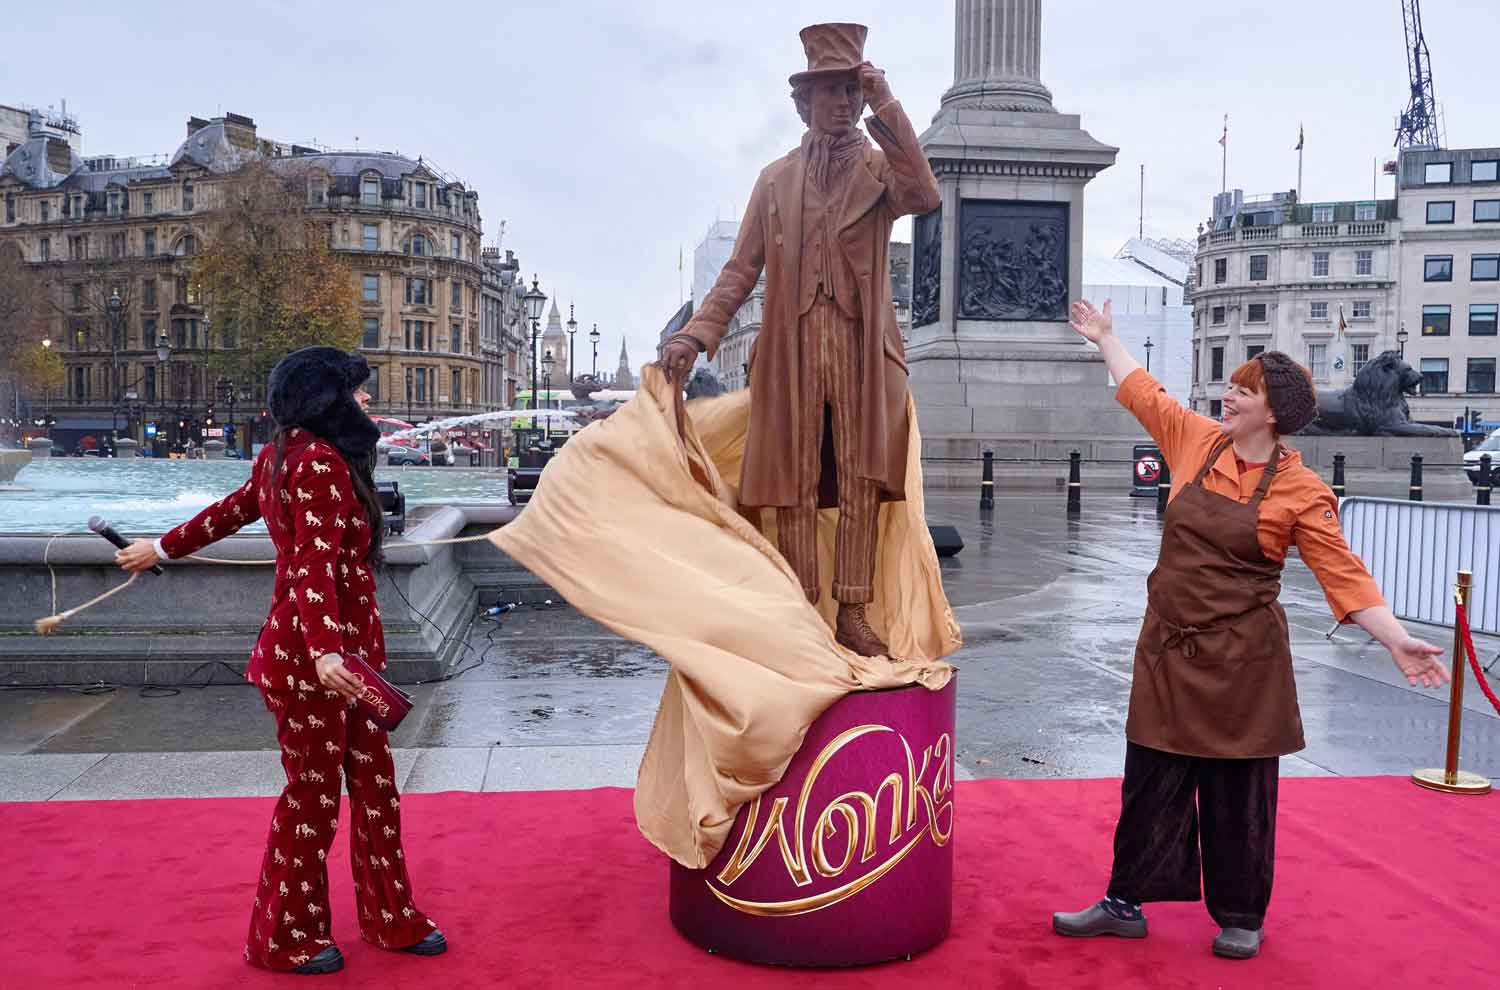 A woman with outstretched arms looks at a lifesize chocolate statue that has just been unveiled in Trafalgar Square.